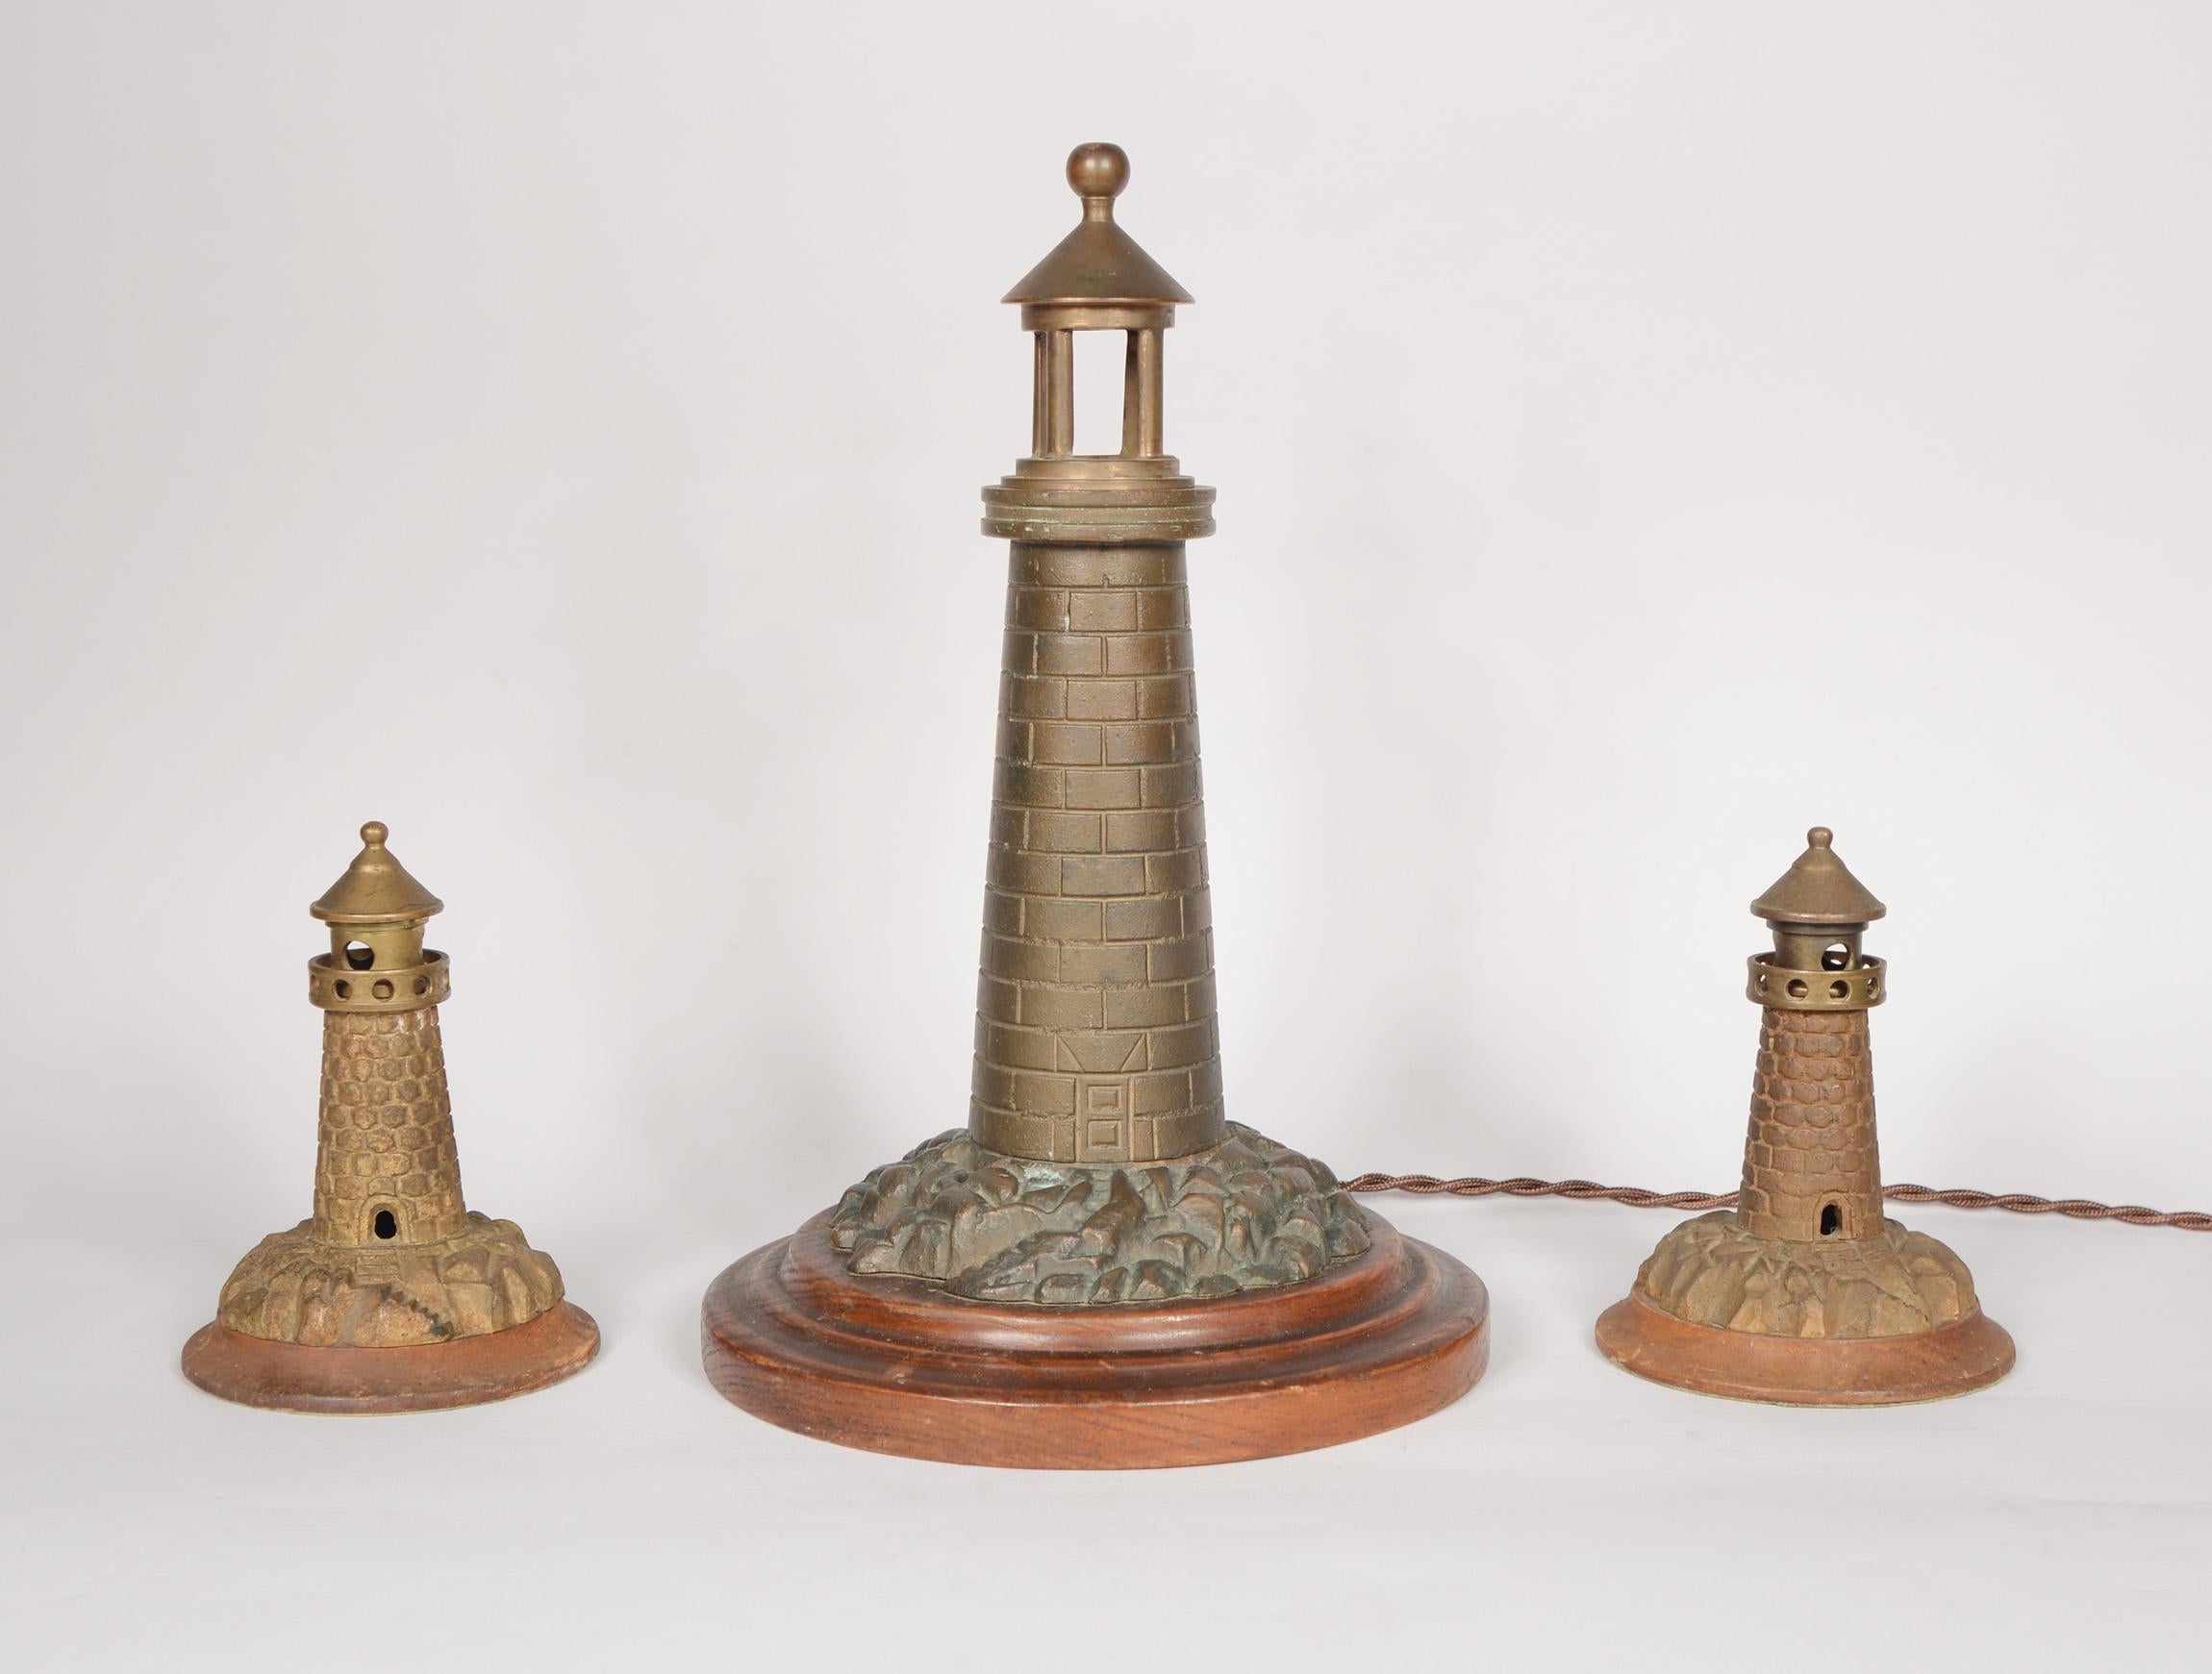 Cast brass lighthouse lamp from about 1920. This lamp came from an estate with two smaller cast brass lighthouses. We don't believe these originally came together as a set, but they have been a set for many years now. The small lighthouses do not